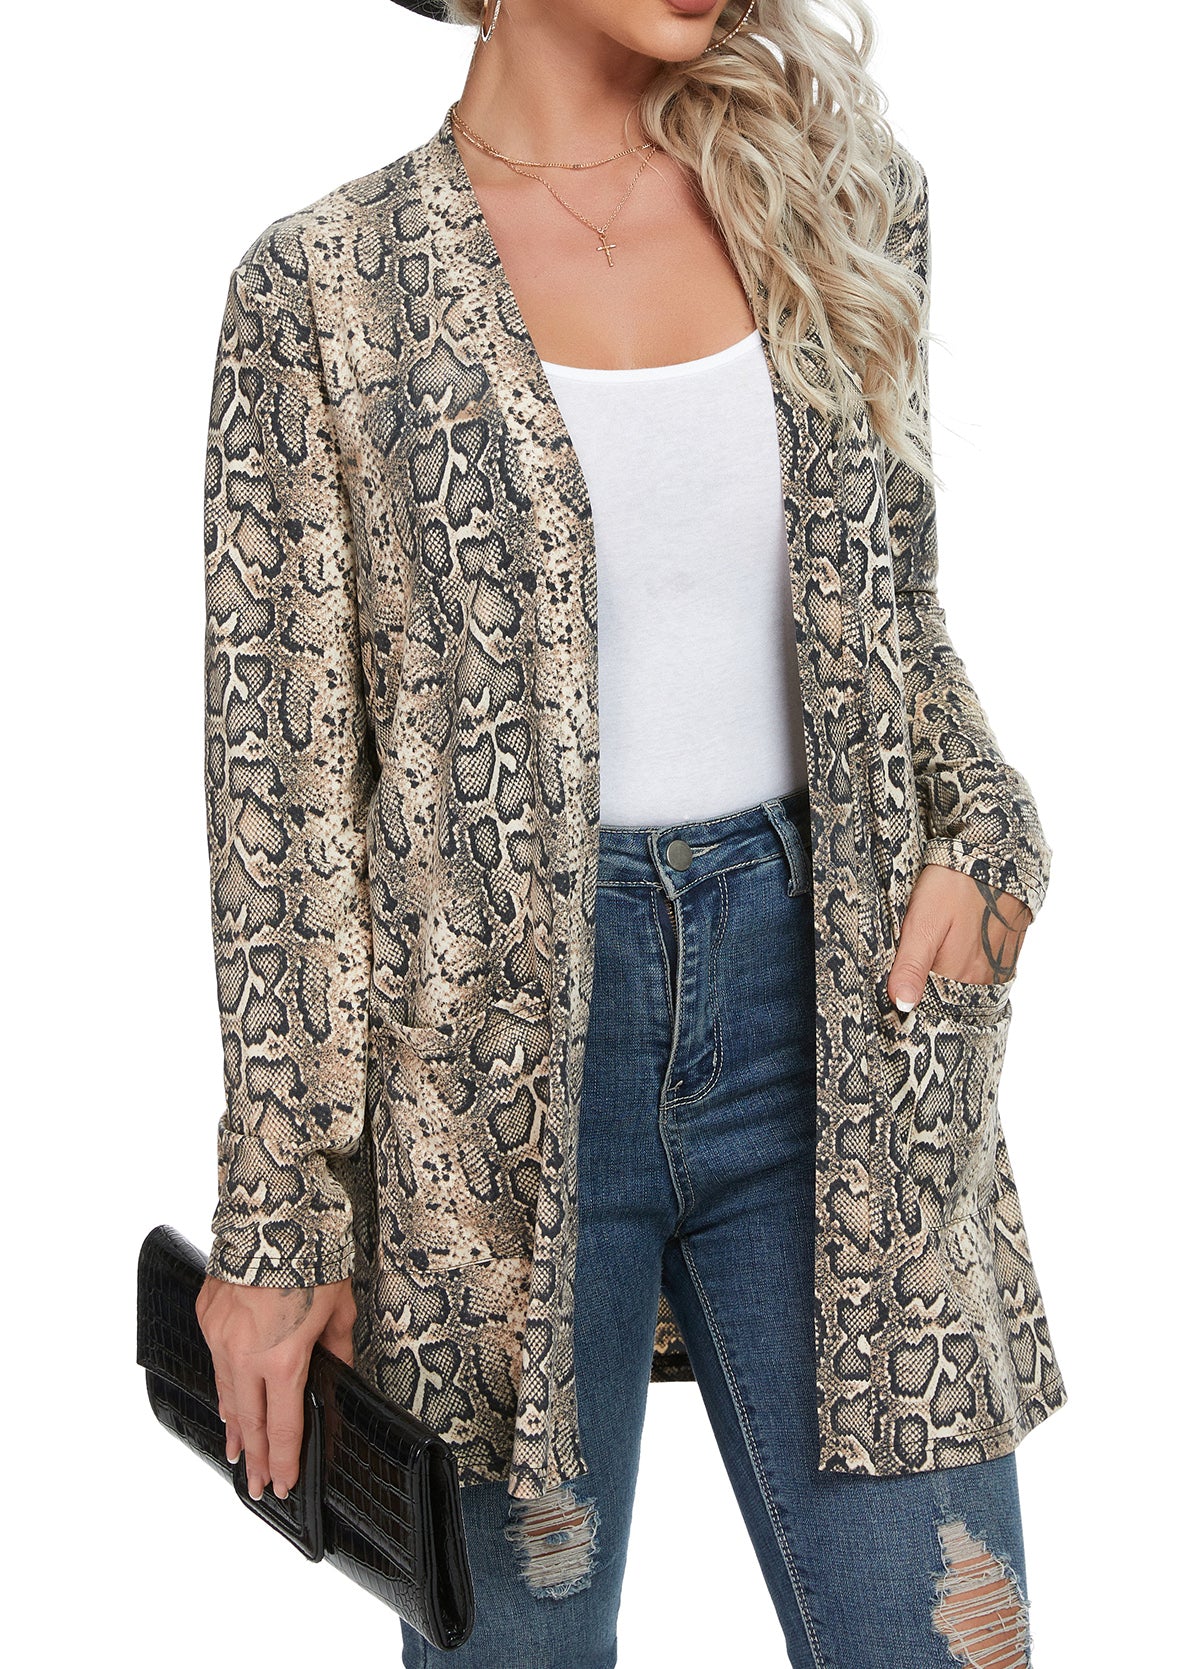 OLRIK Women's Casual Leopard Printed Cardigans Long Sleeve Cover Up with Pockets